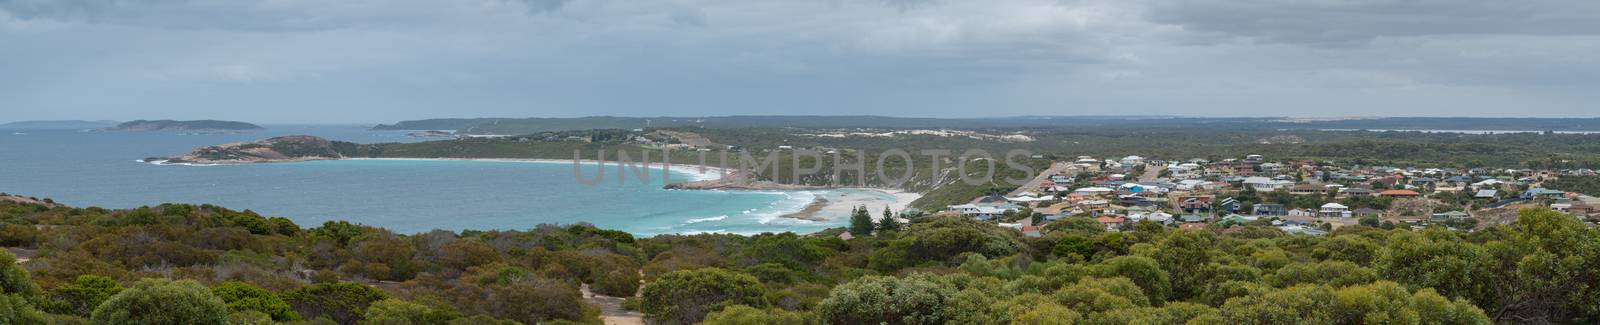 Panoramic view over the West Beach area of Esperance, Western Australia